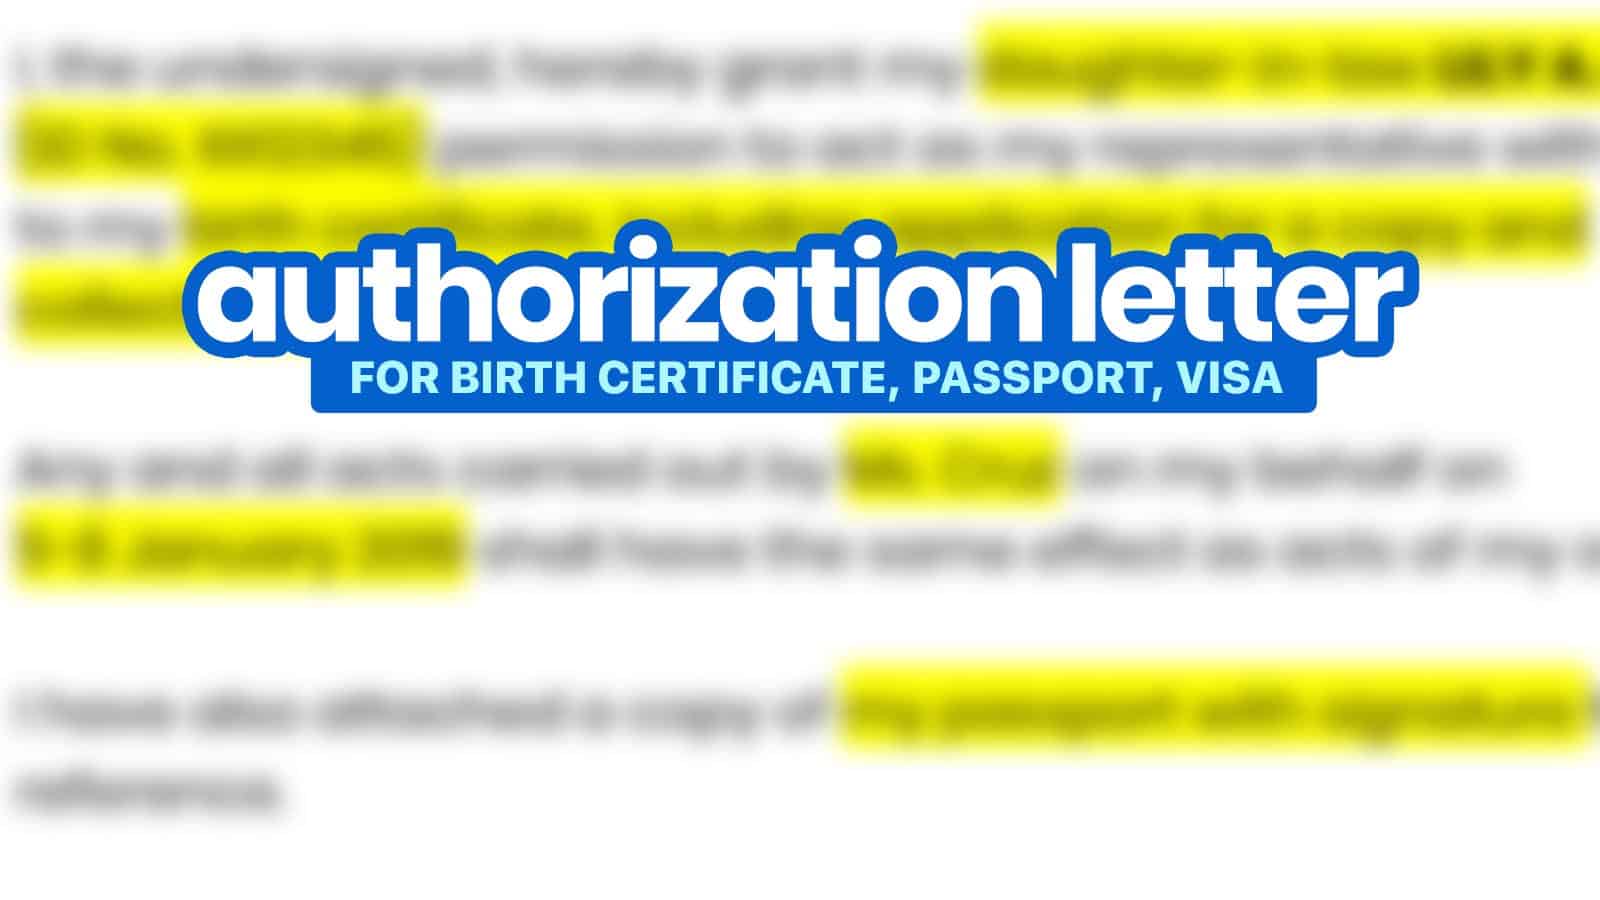 Sample AUTHORIZATION LETTERS